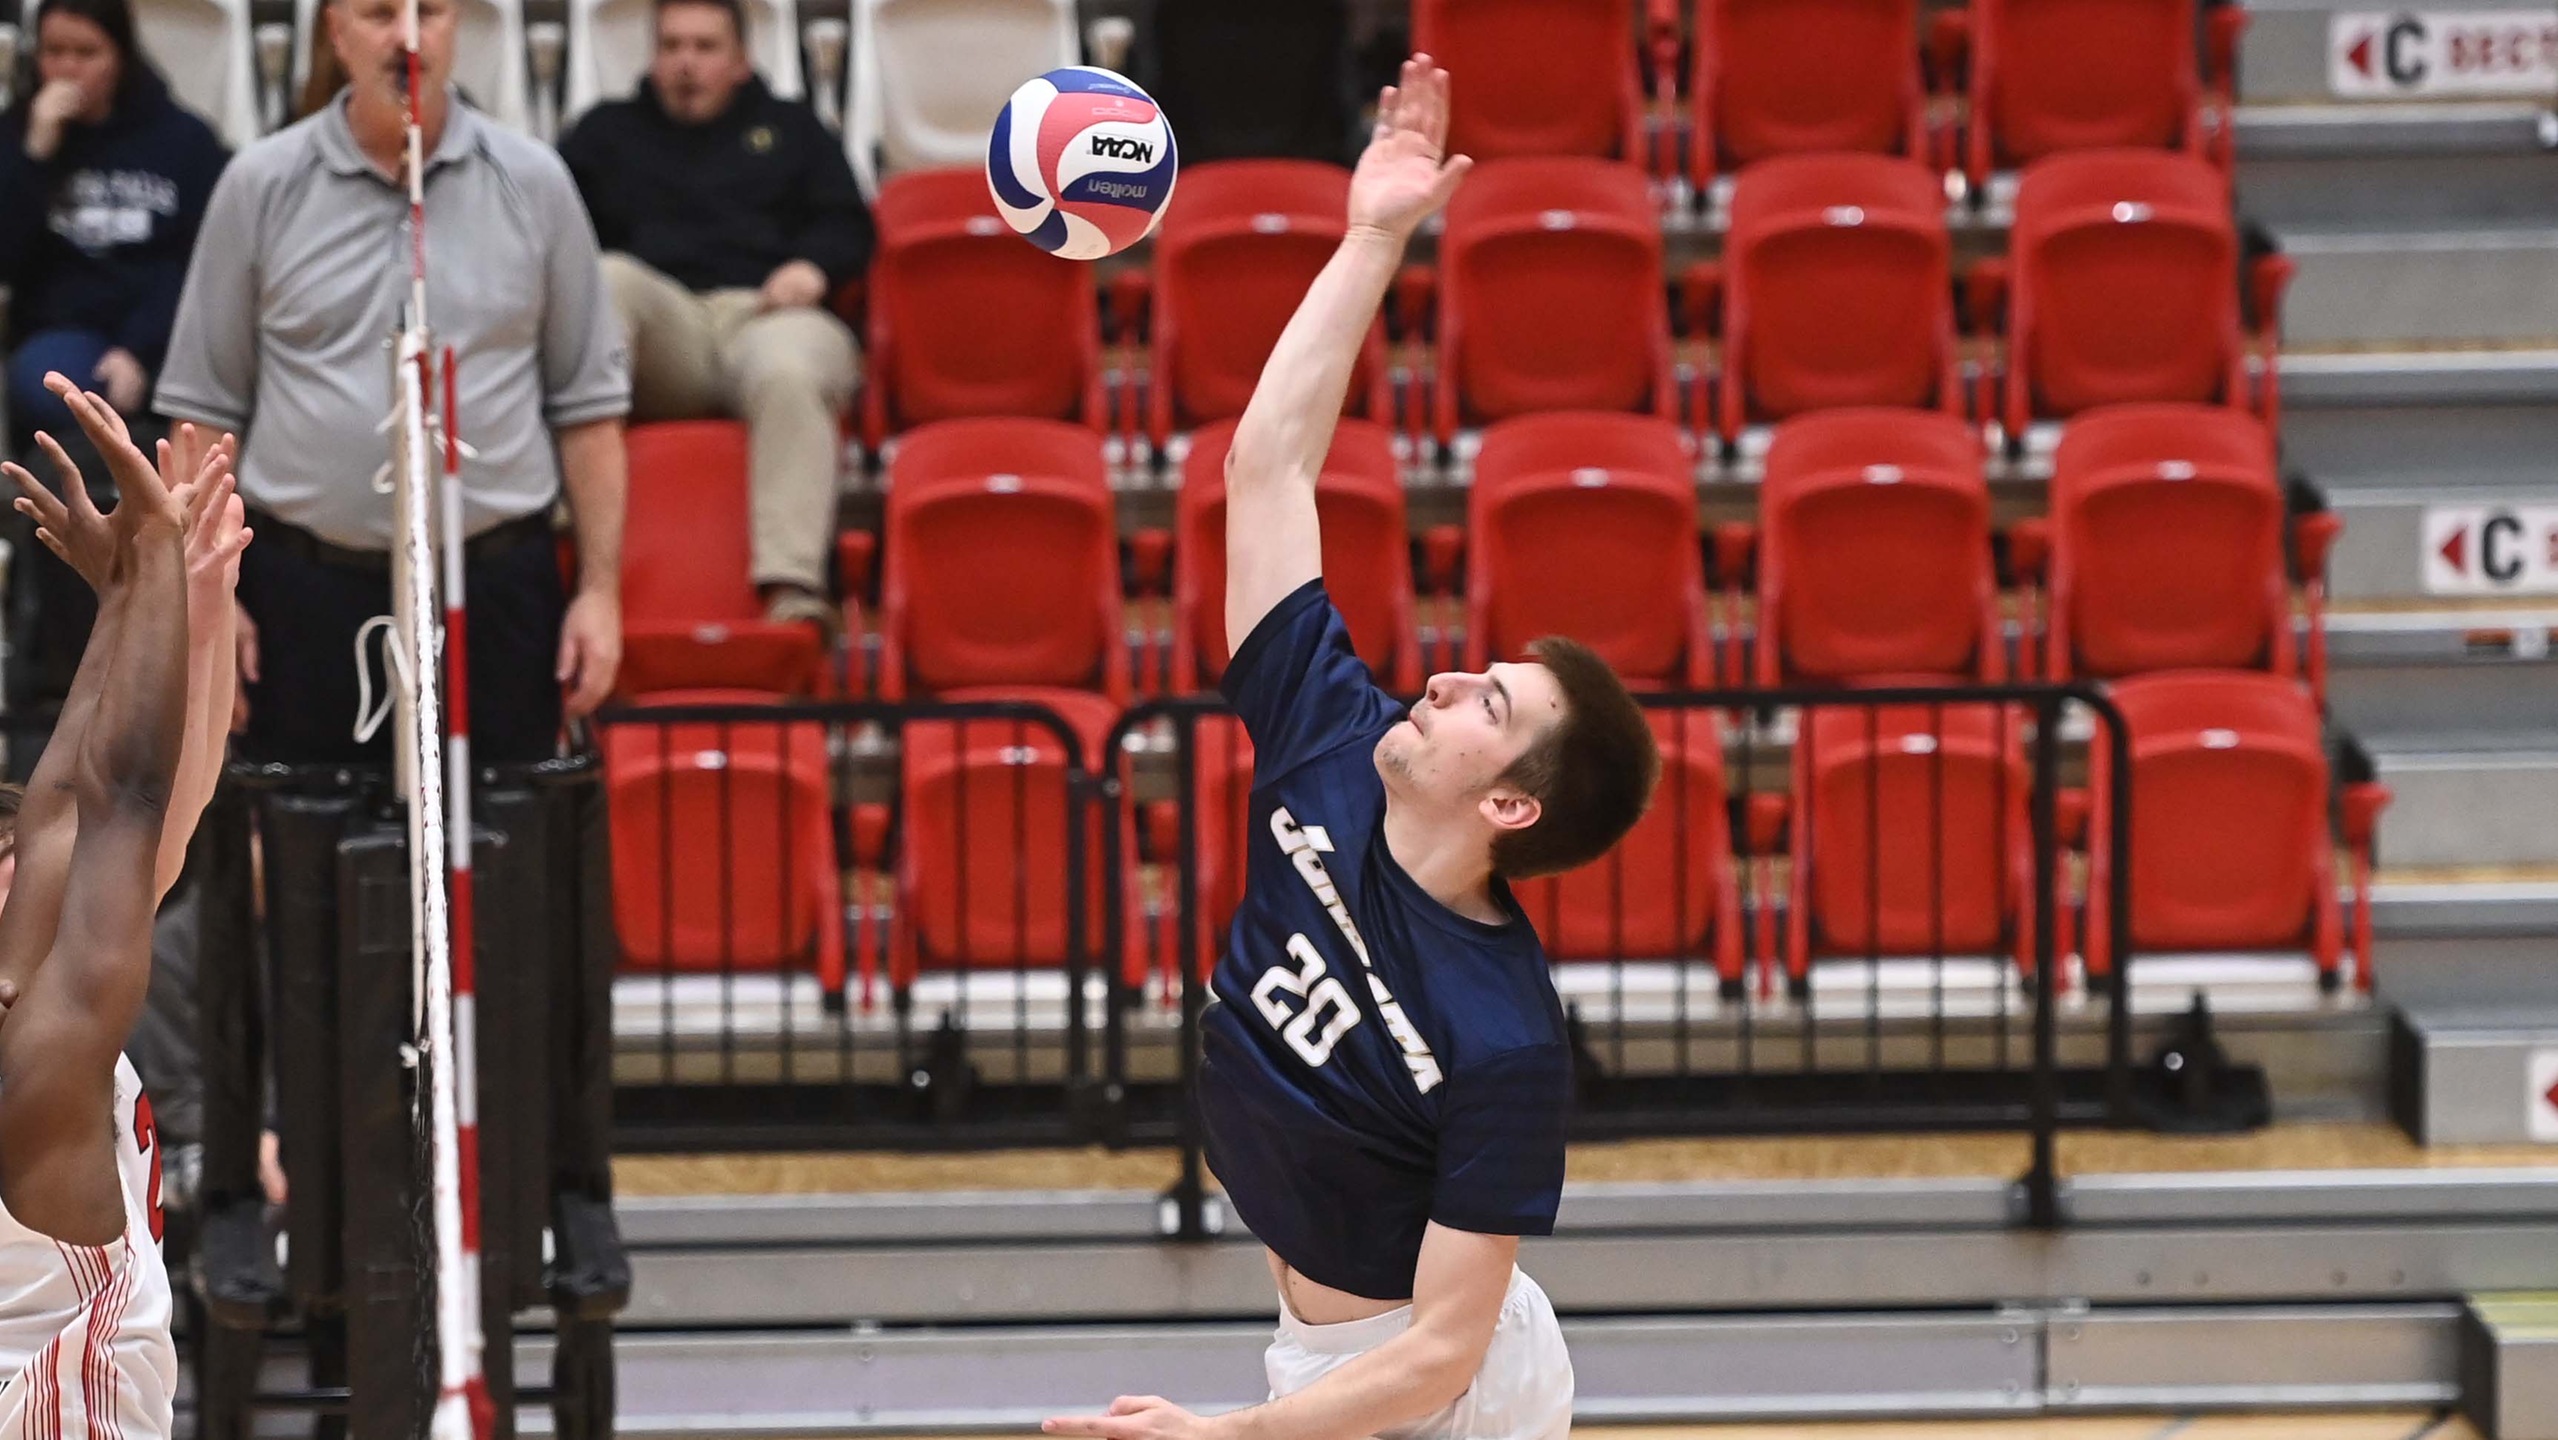 Men's Volleyball Falls to Southern Virginia in CVC Championship Rematch